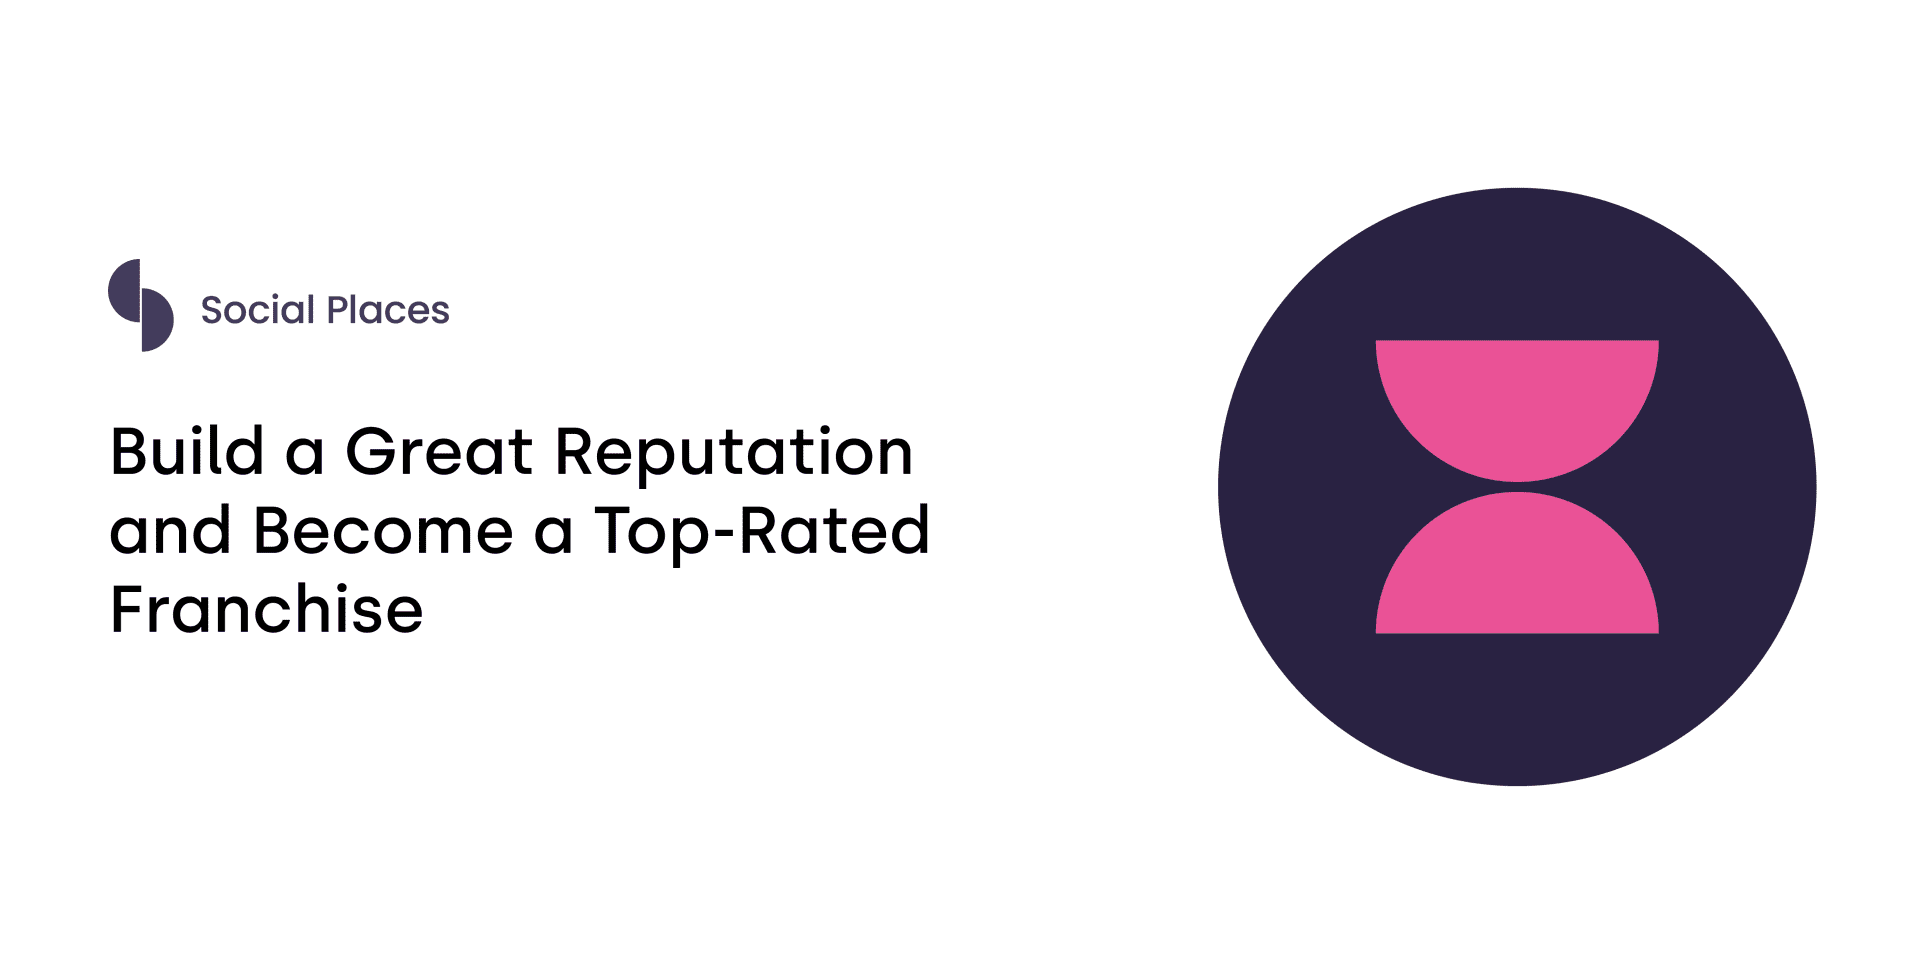 Build a Great Reputation and Become a Top-Rated Franchise